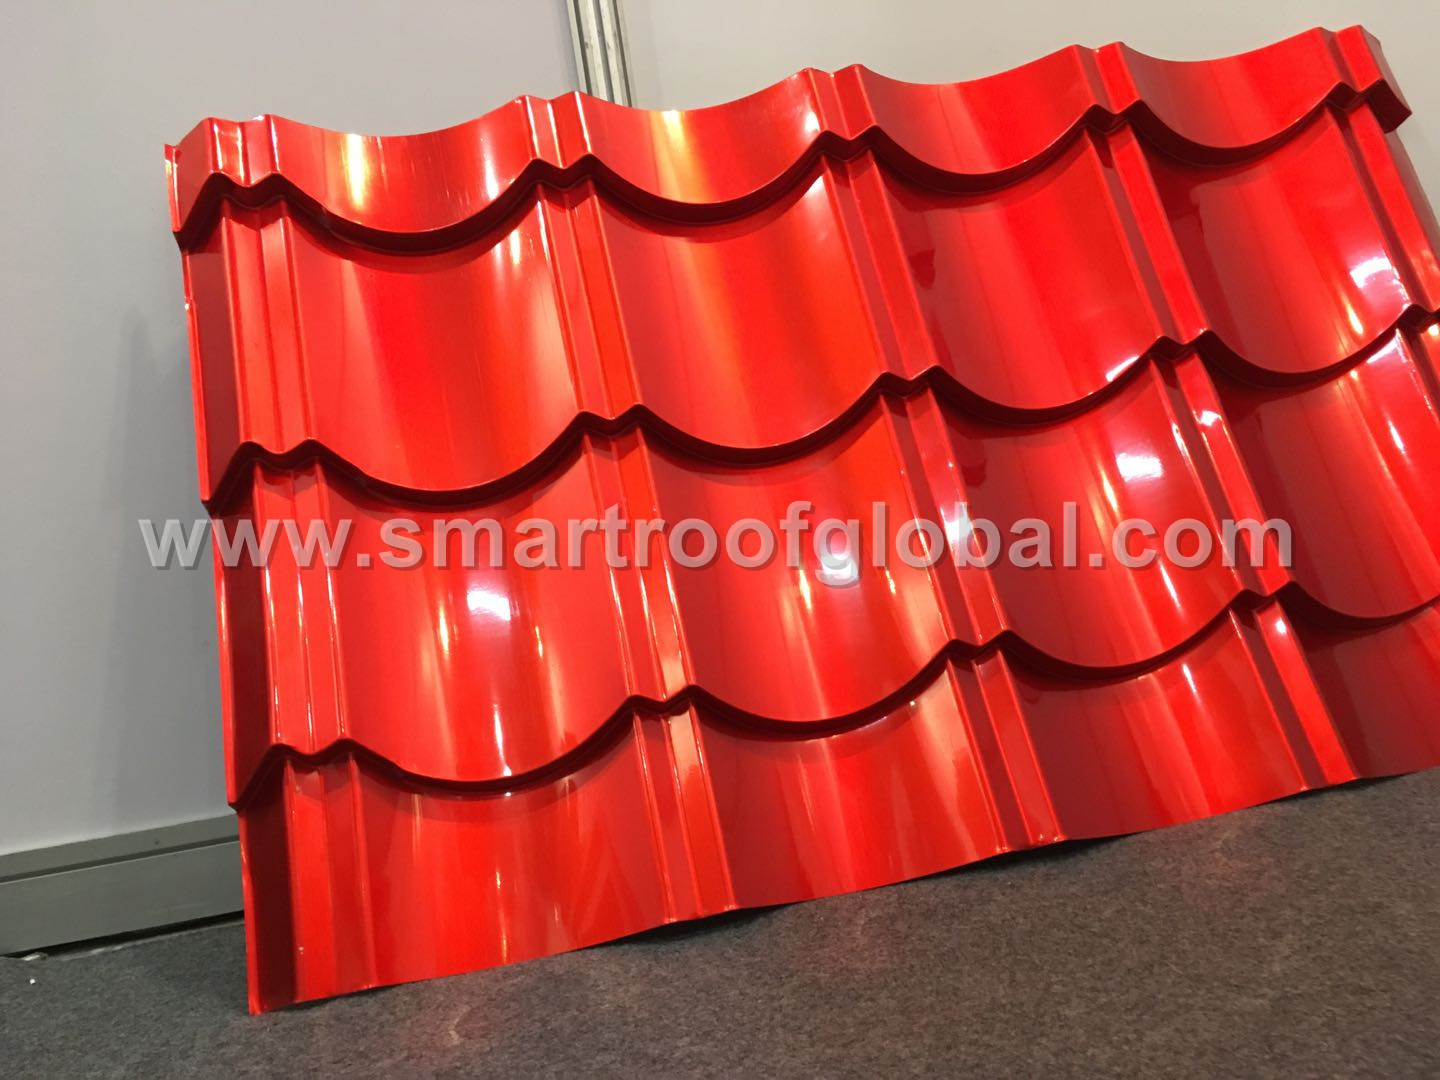 Wholesale Decorative Metal Roofing - Home Depot Metal Roofing – Smartroof